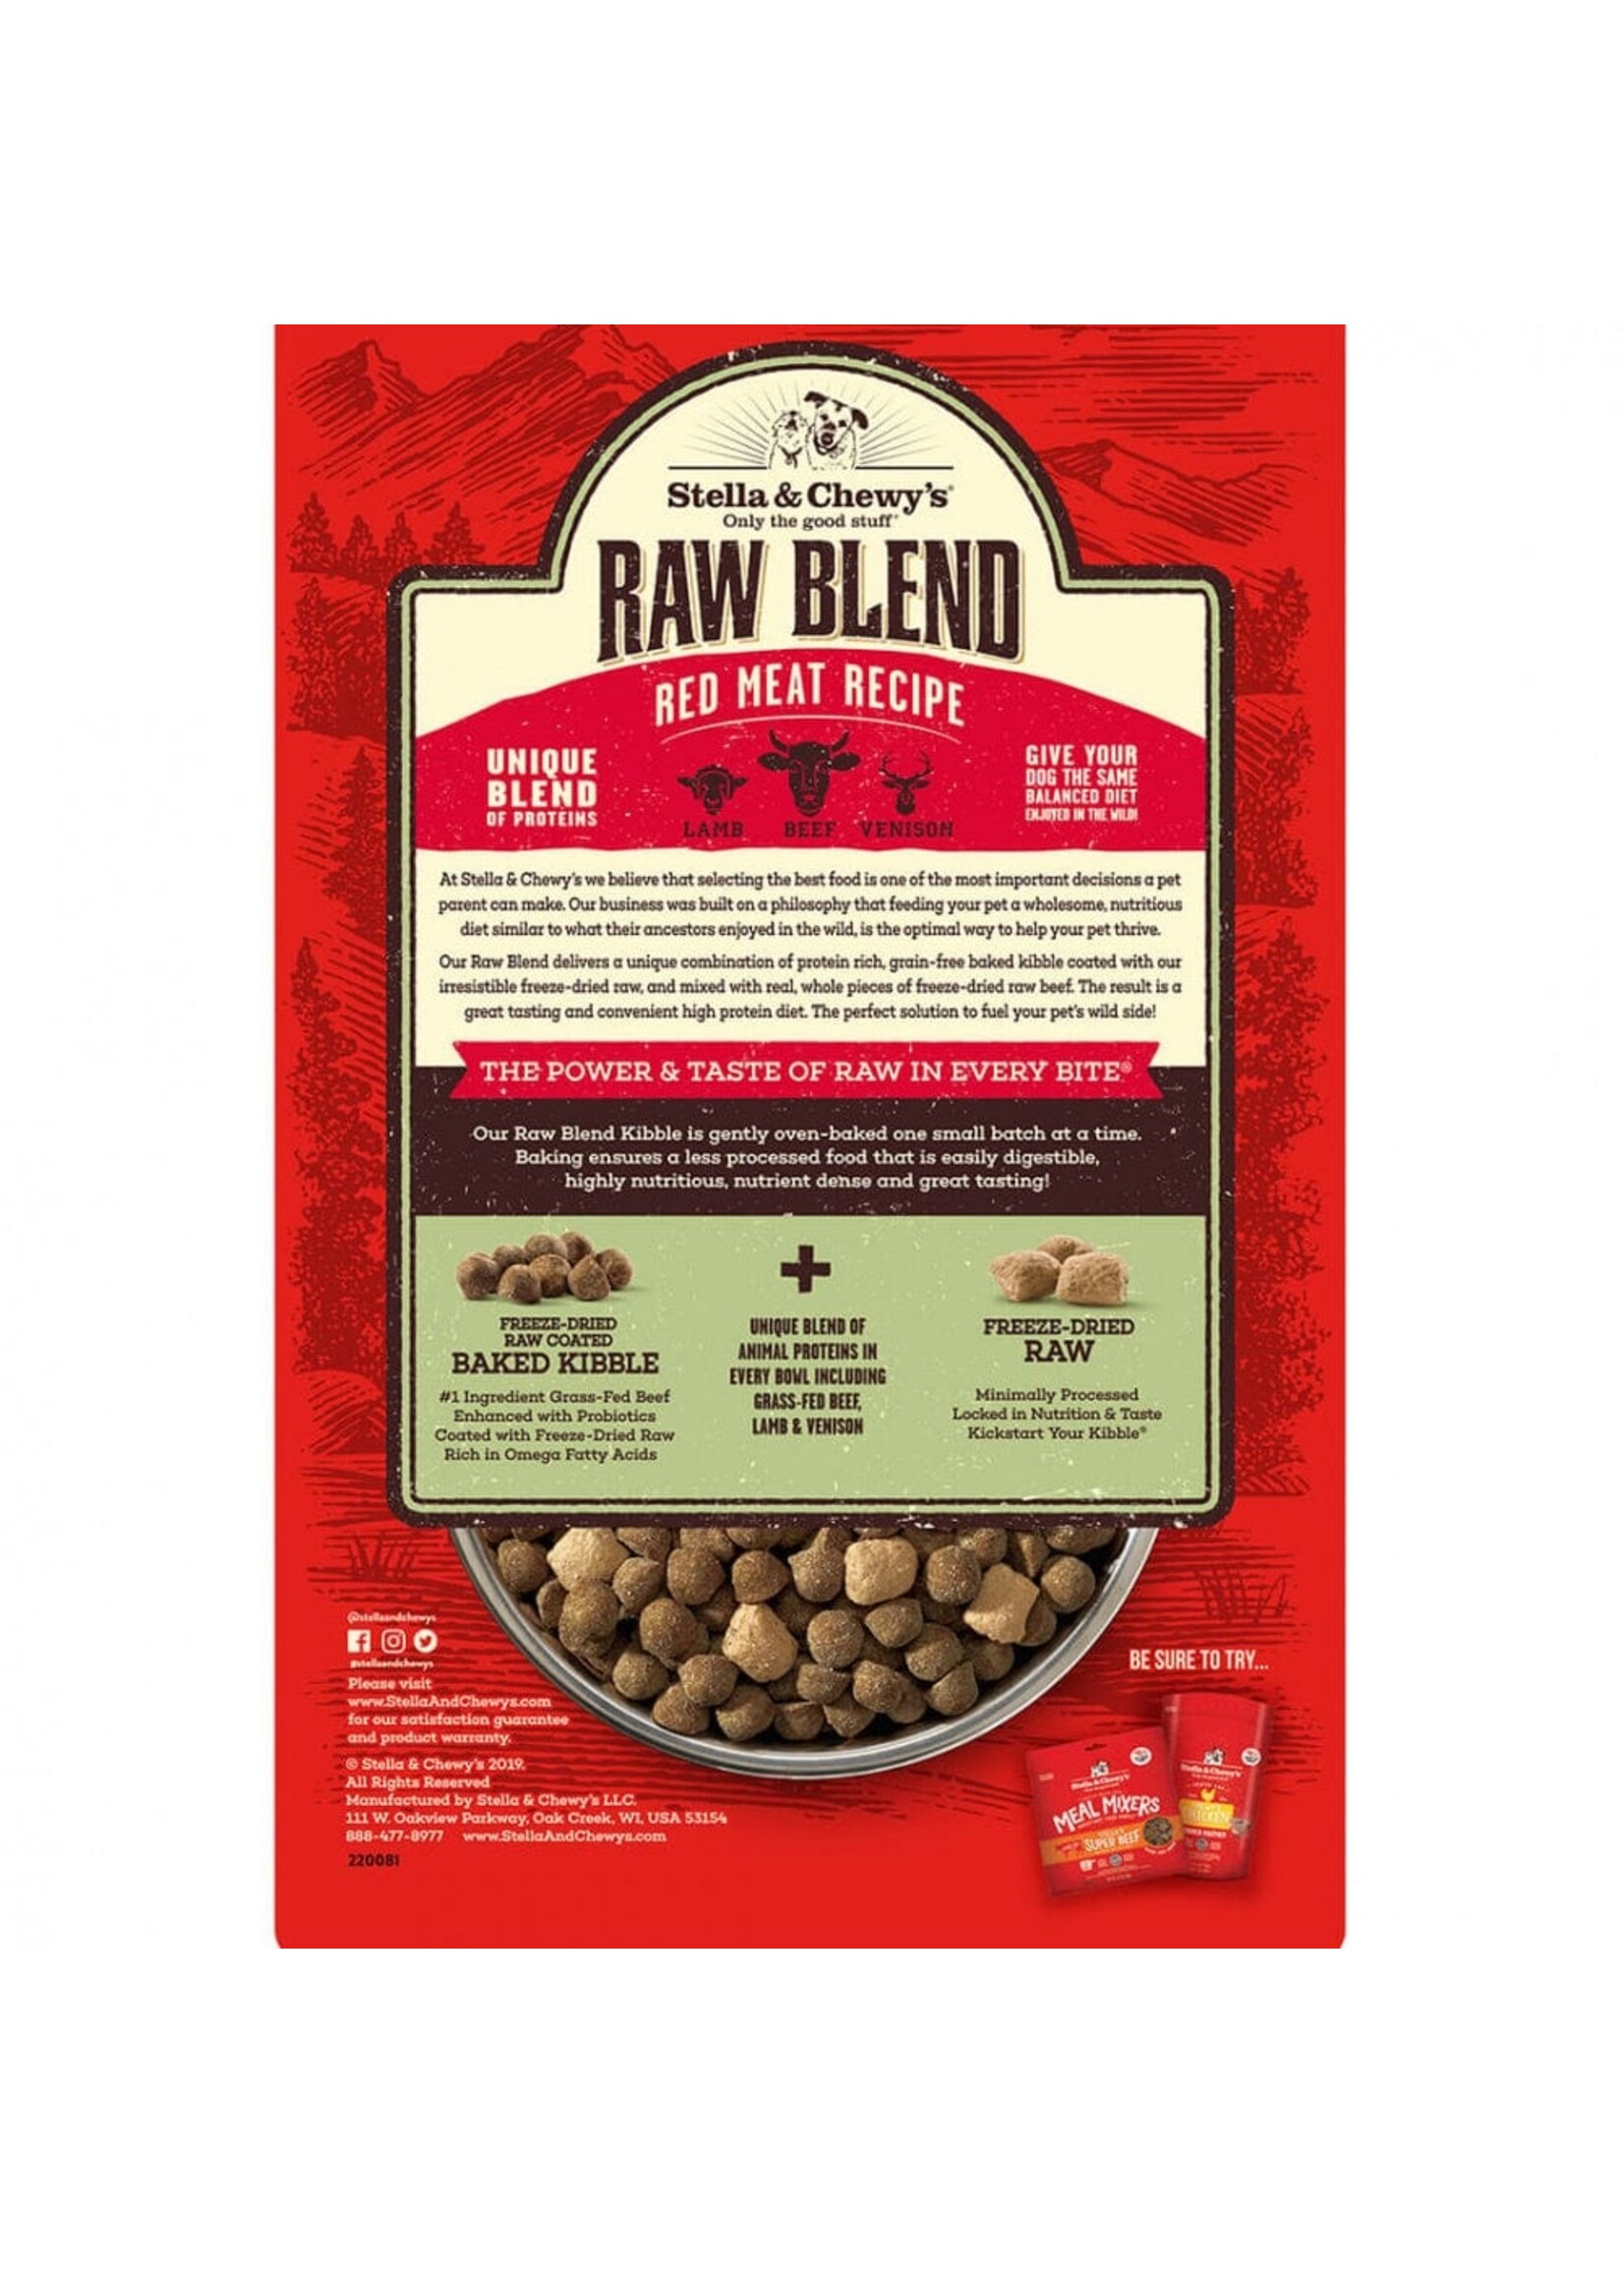 Stella and Chewy's Stella & Chewy's Raw Blend Red Meat Recipe Small Breed